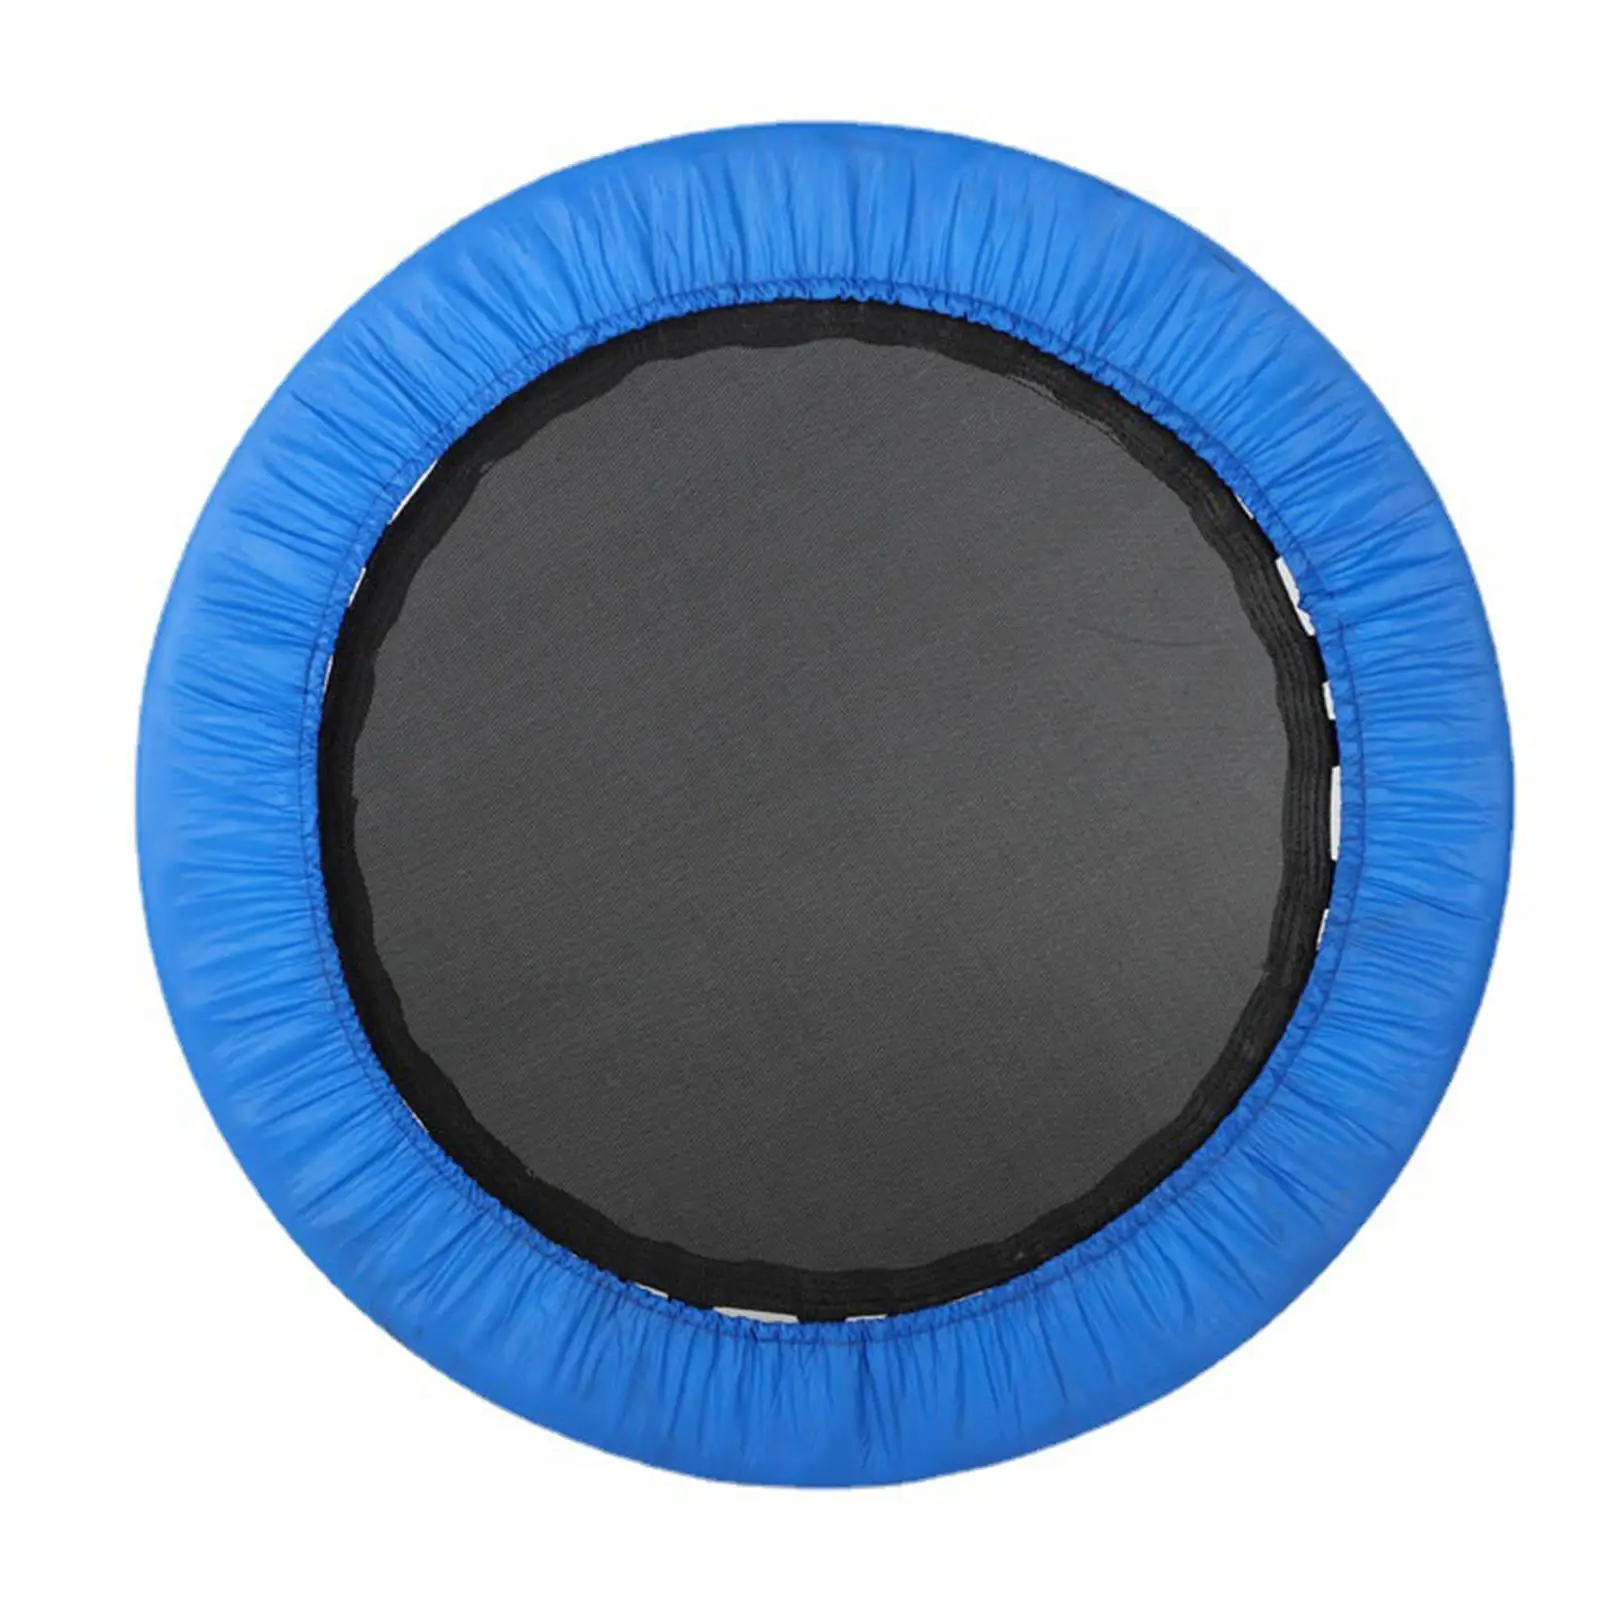 Trampoline Mat Replacement Jumping Mat for 55inch Trampoline Accessory Premium